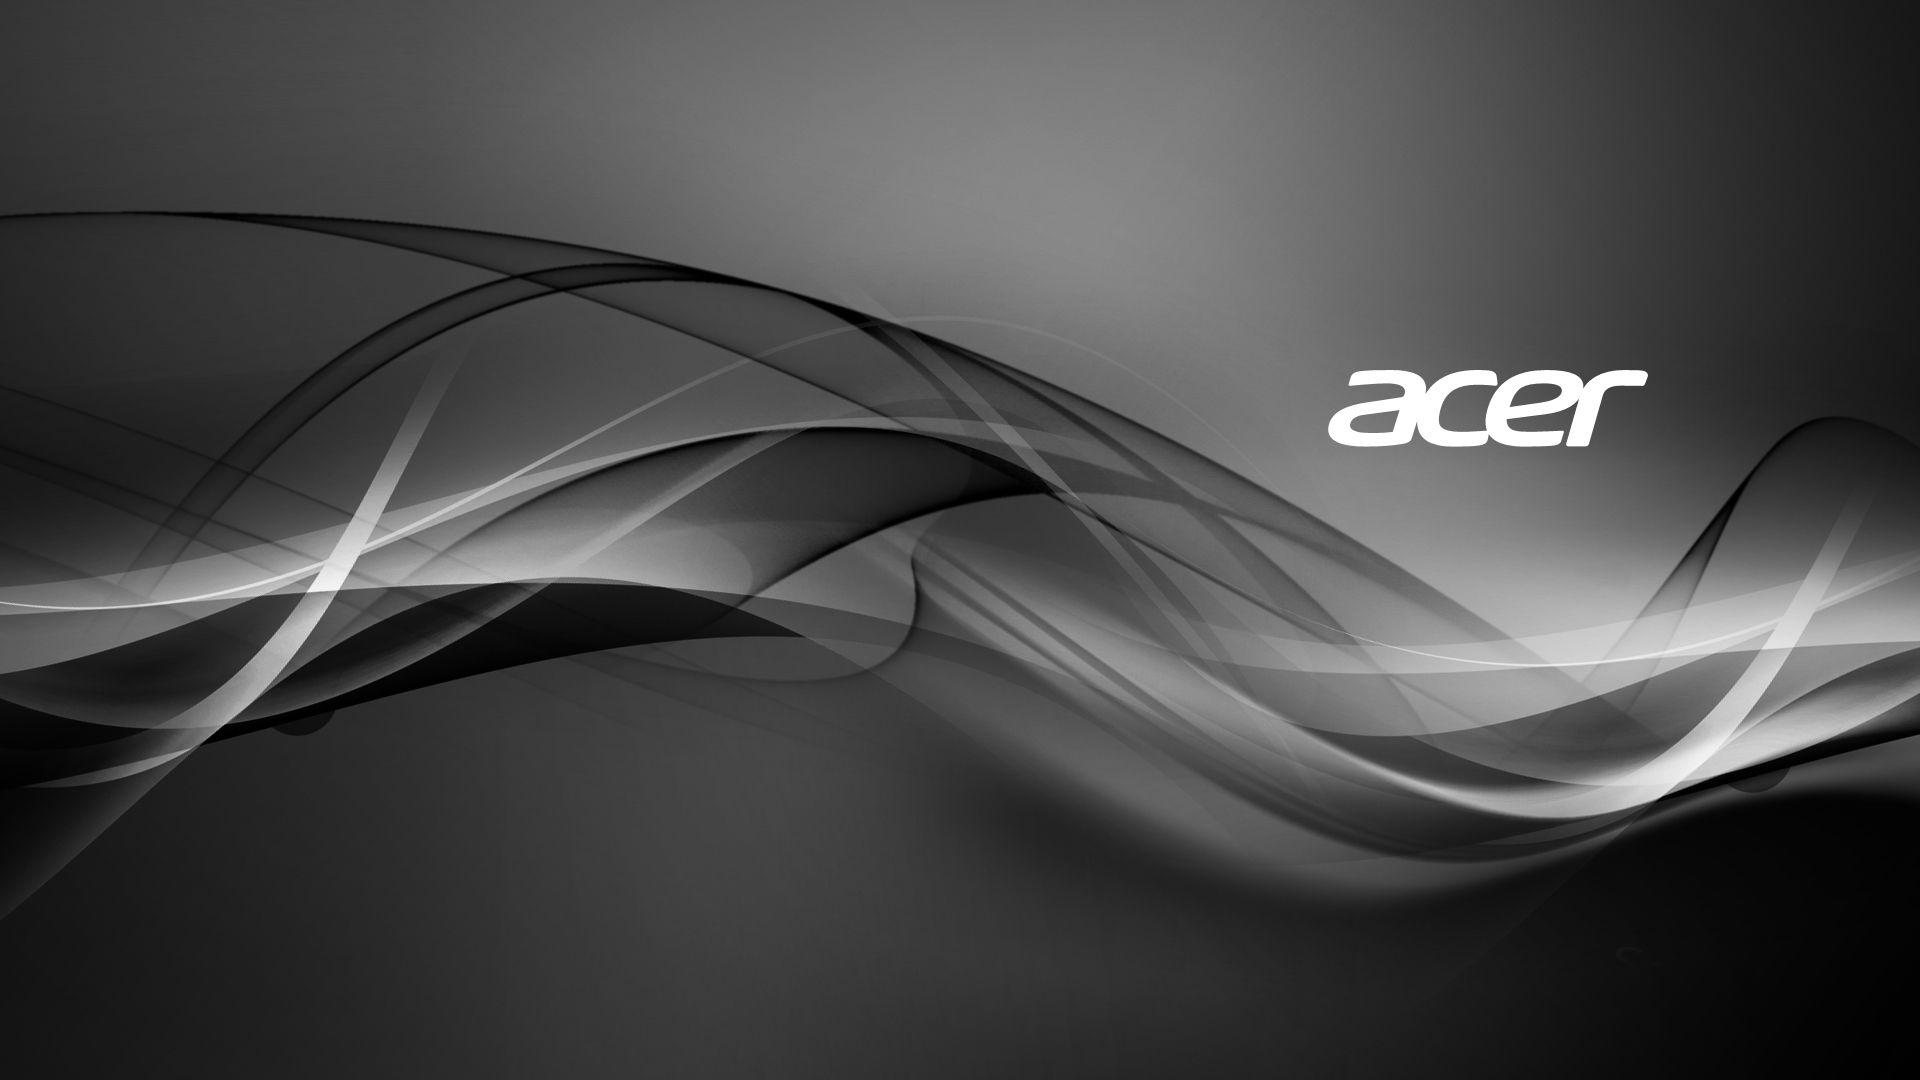 Acer laptop hd wallpapers